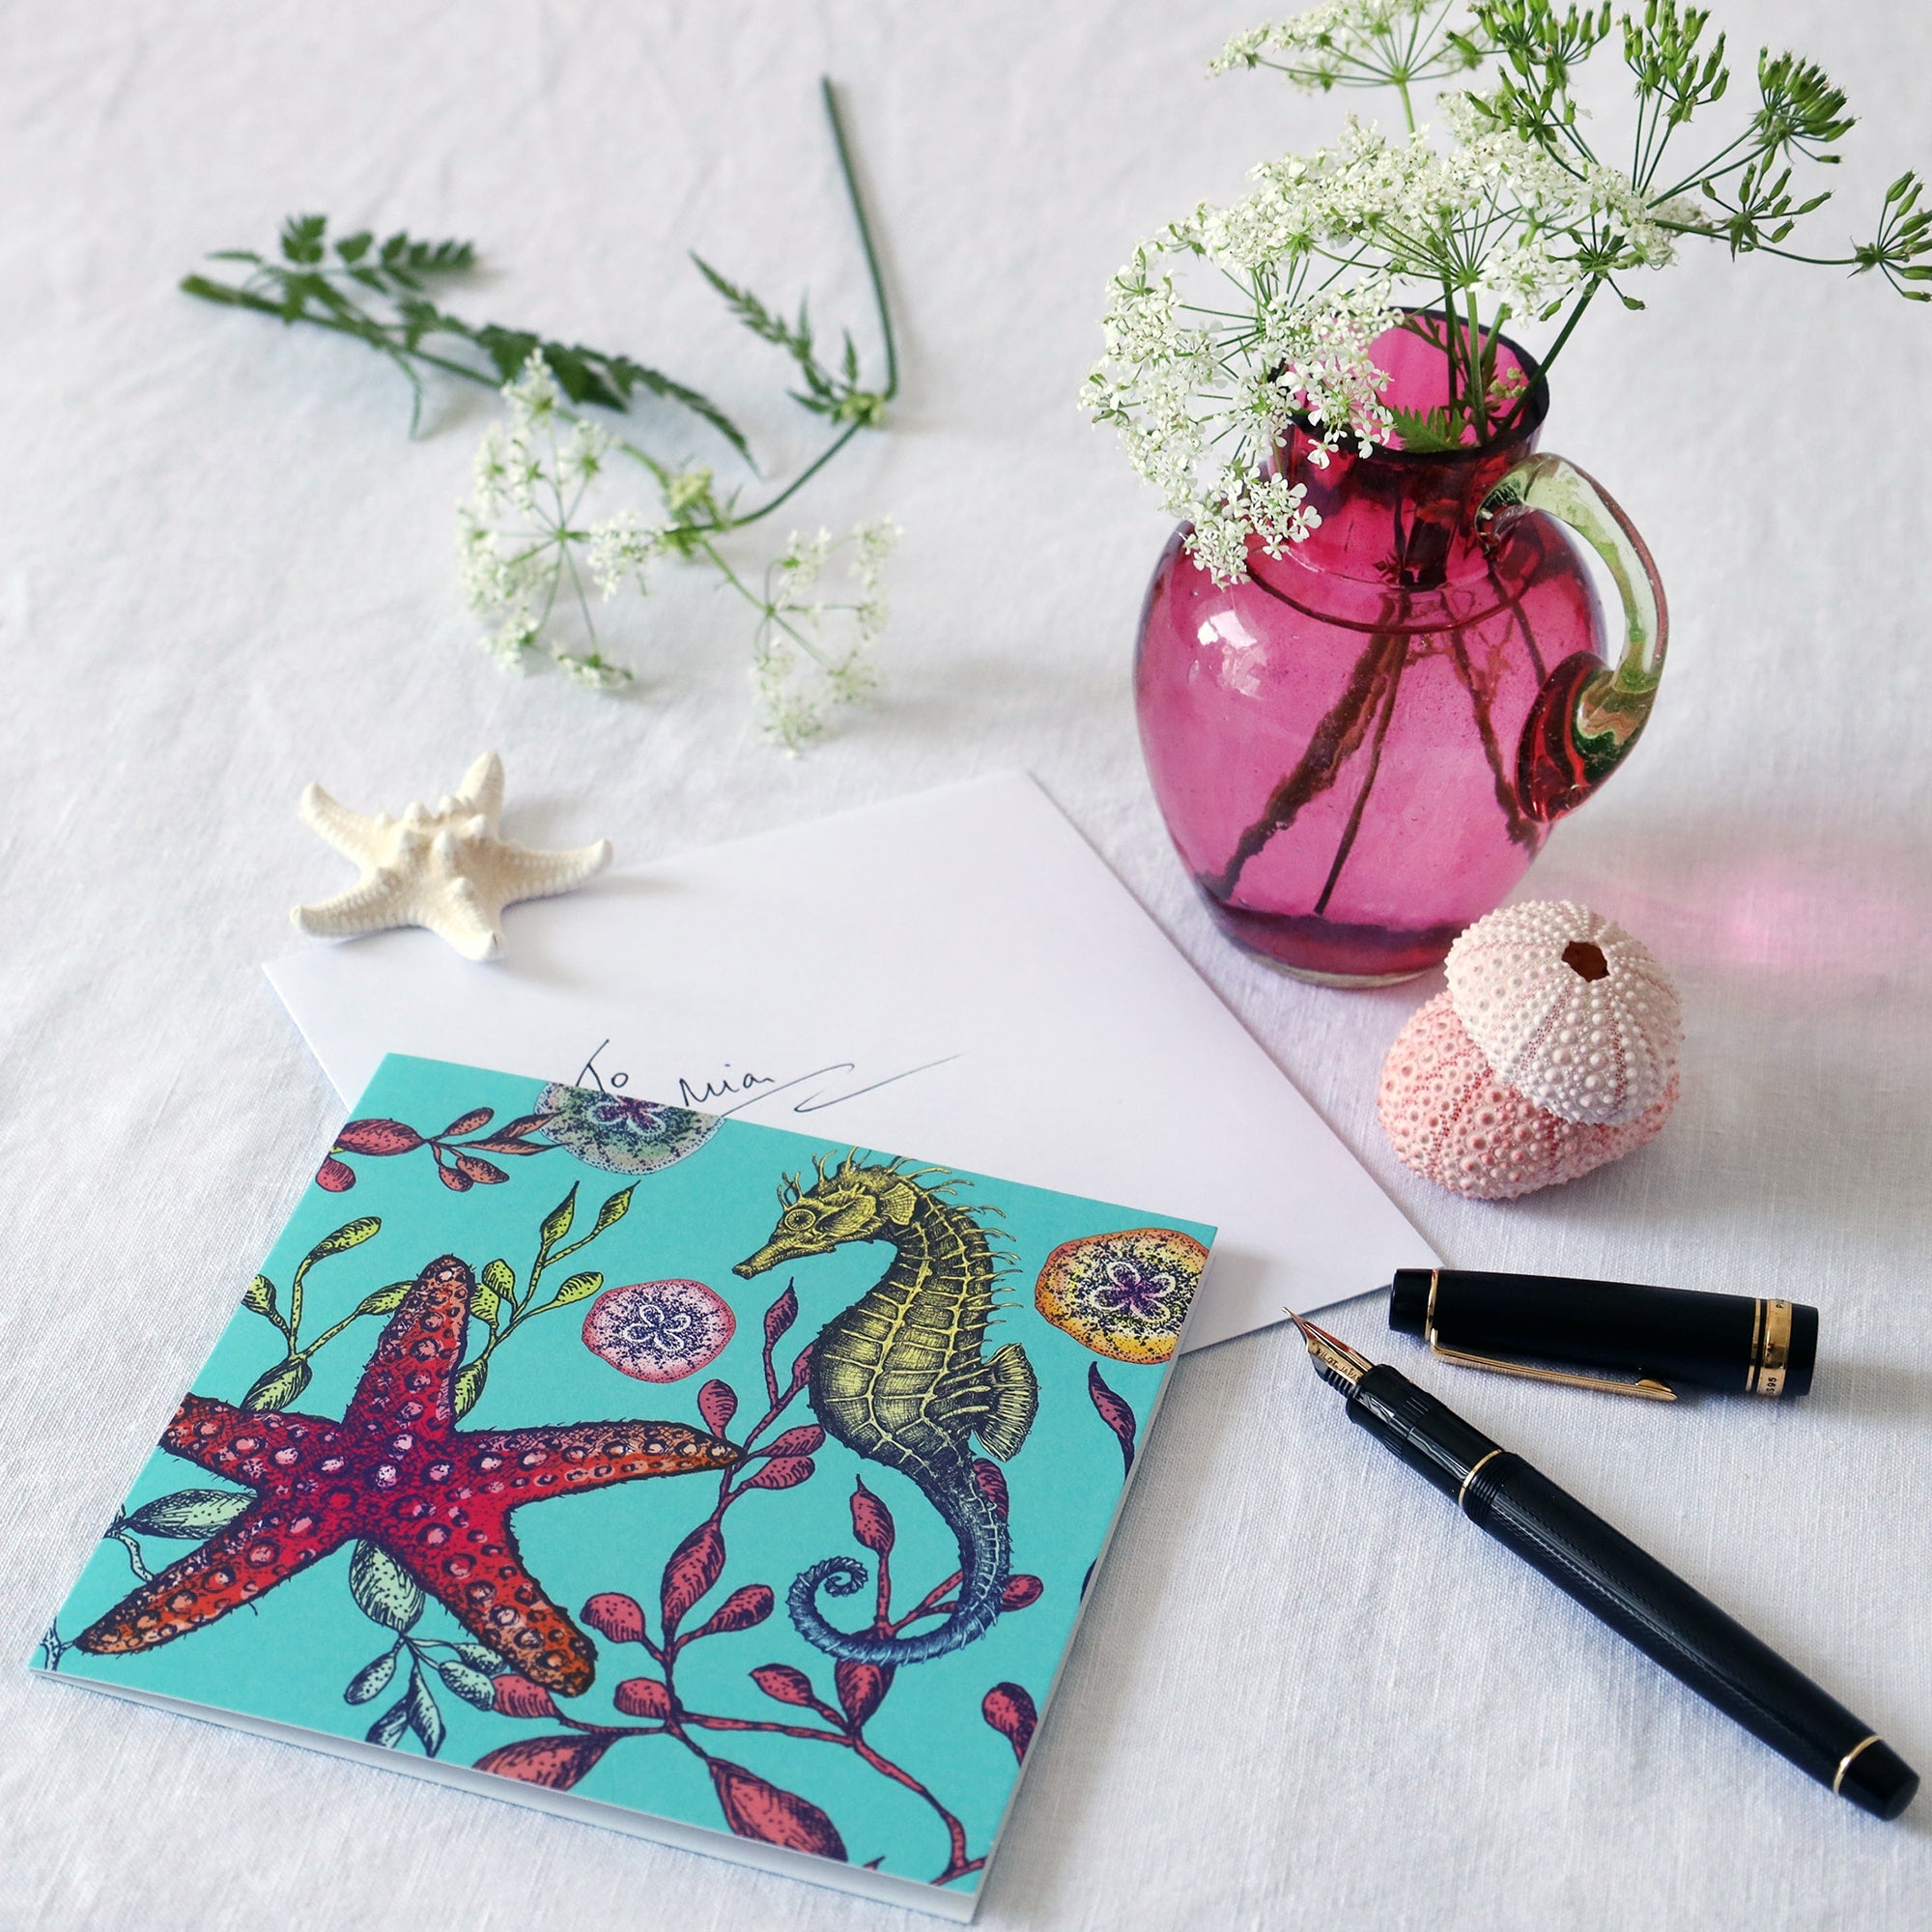 brightly coloured illustrated greeting card with seahorse, seaweeds, baby jellyfish and starfish on an aqua coloured background lying on a white table cloth with a fountain pen, hand written envelope shells and a small cranberry glass jug with wild flowers in 